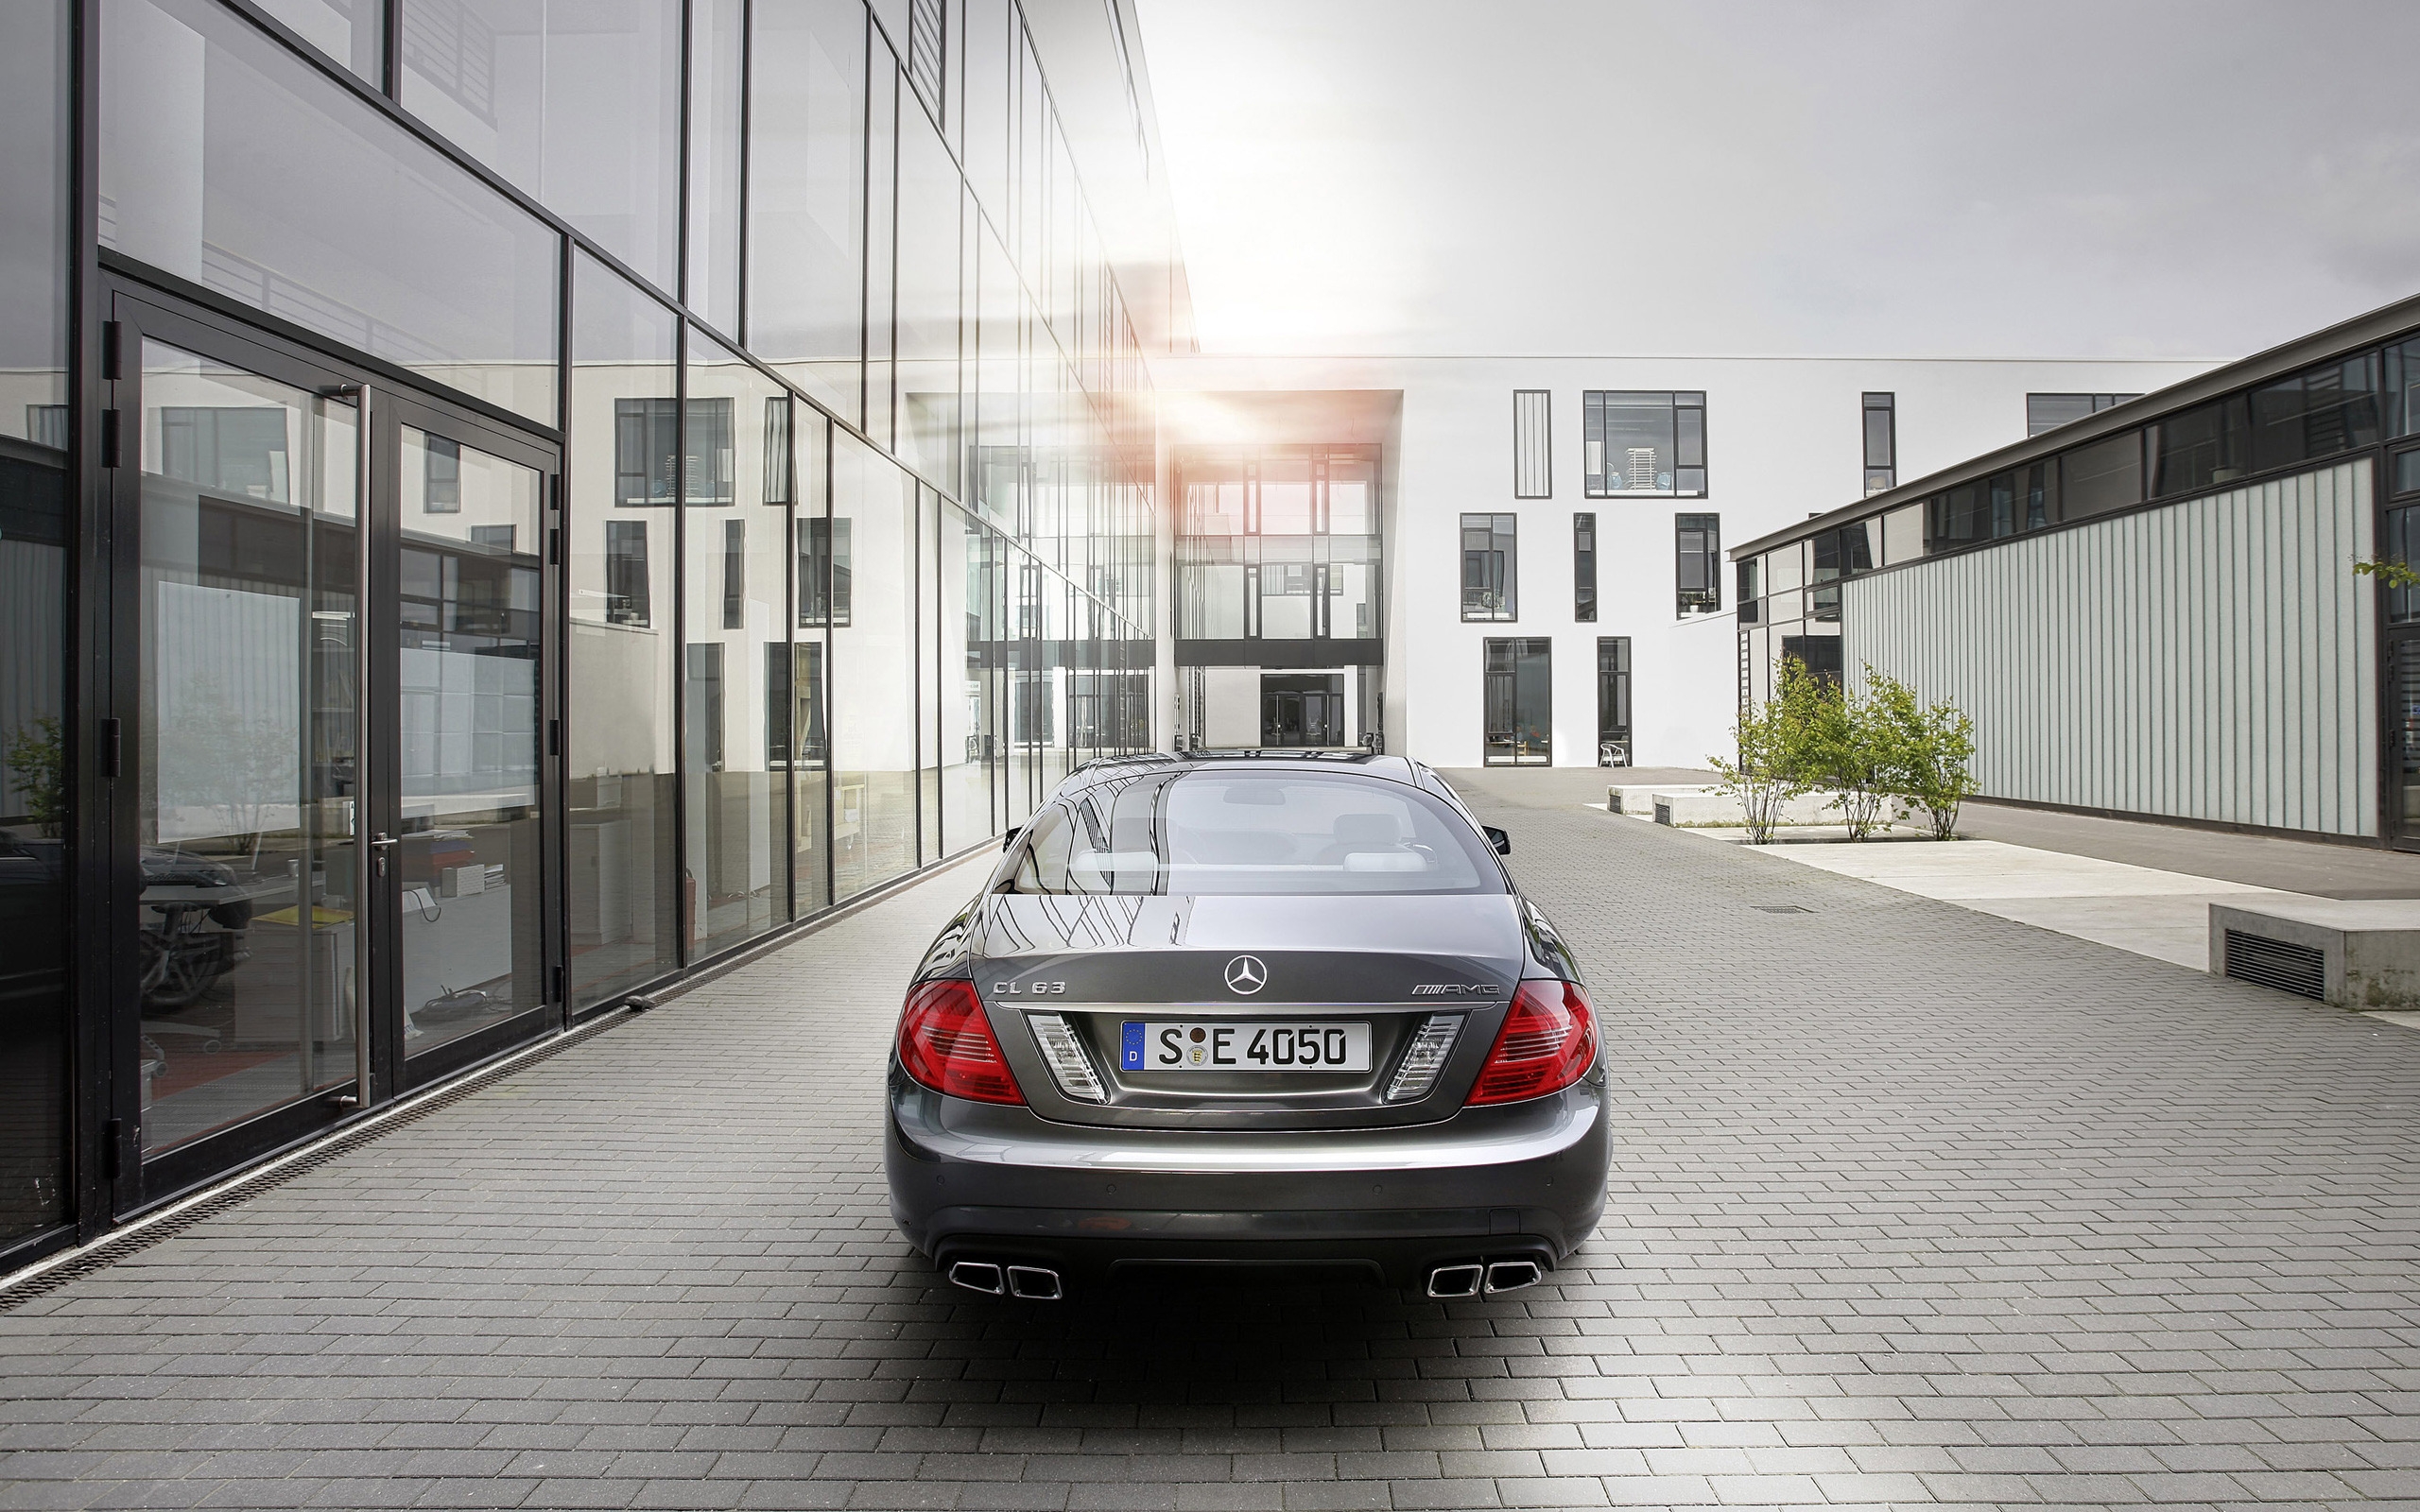 Mercedes CL63 AMG 2011 Rear for 2560 x 1600 widescreen resolution